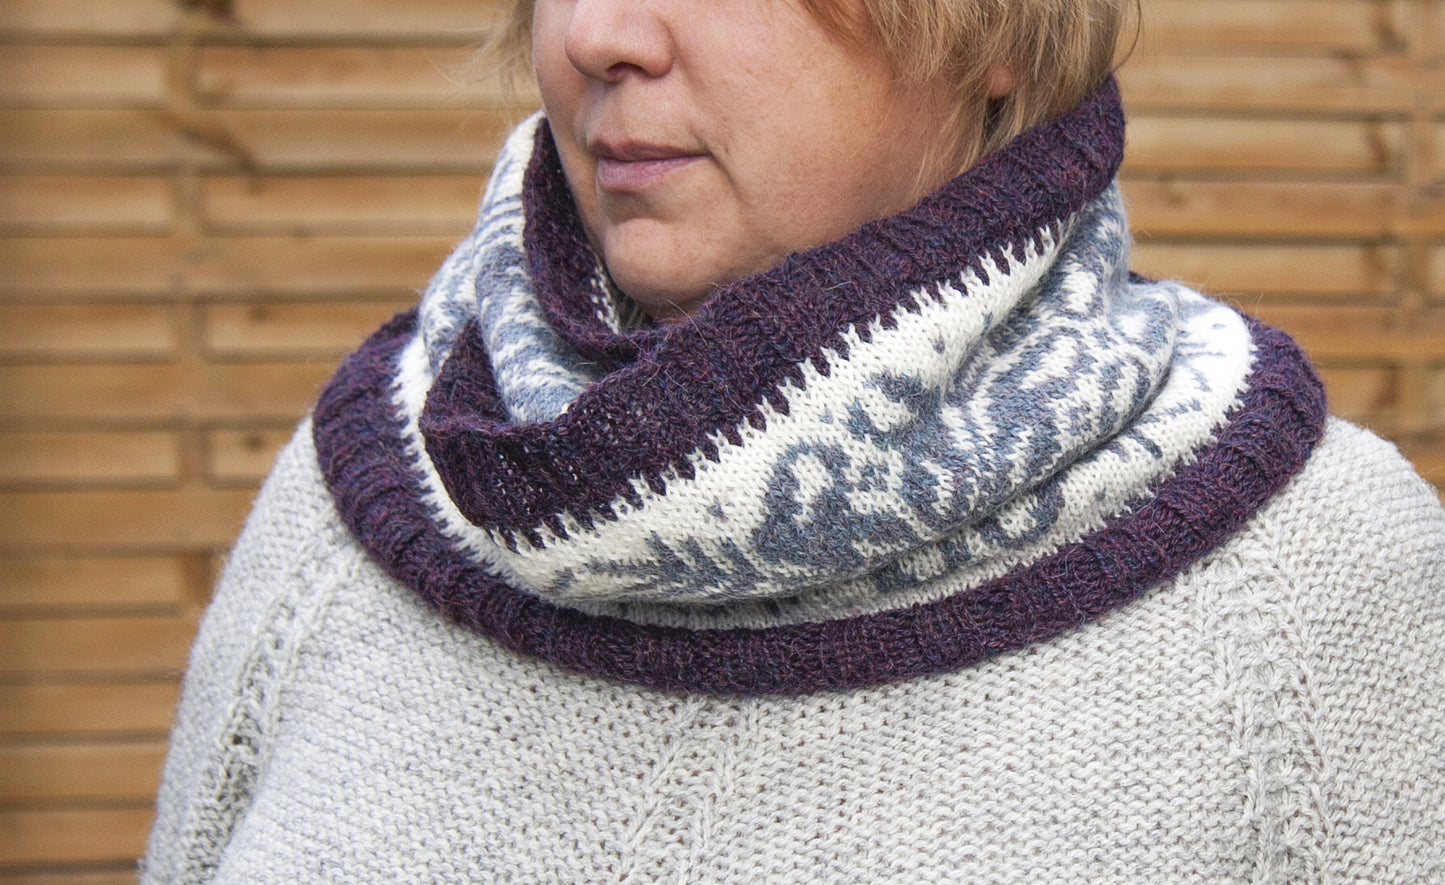 SNOWFLAKES Hand-Knitted Alpaca Cowl